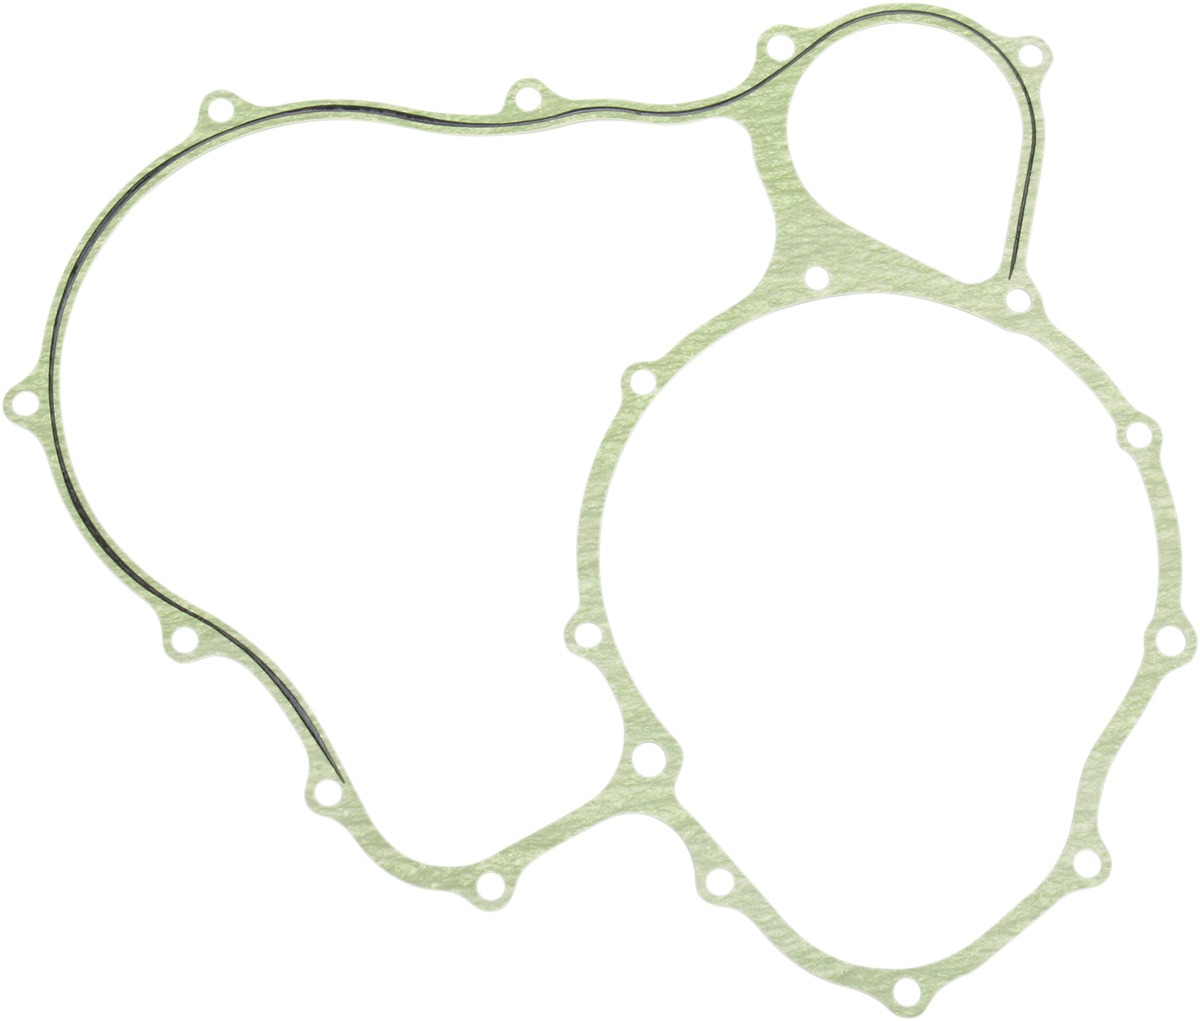 Stator Cover Gasket - For 1985 Honda GL1200i/GL1200A GoldWing - Click Image to Close